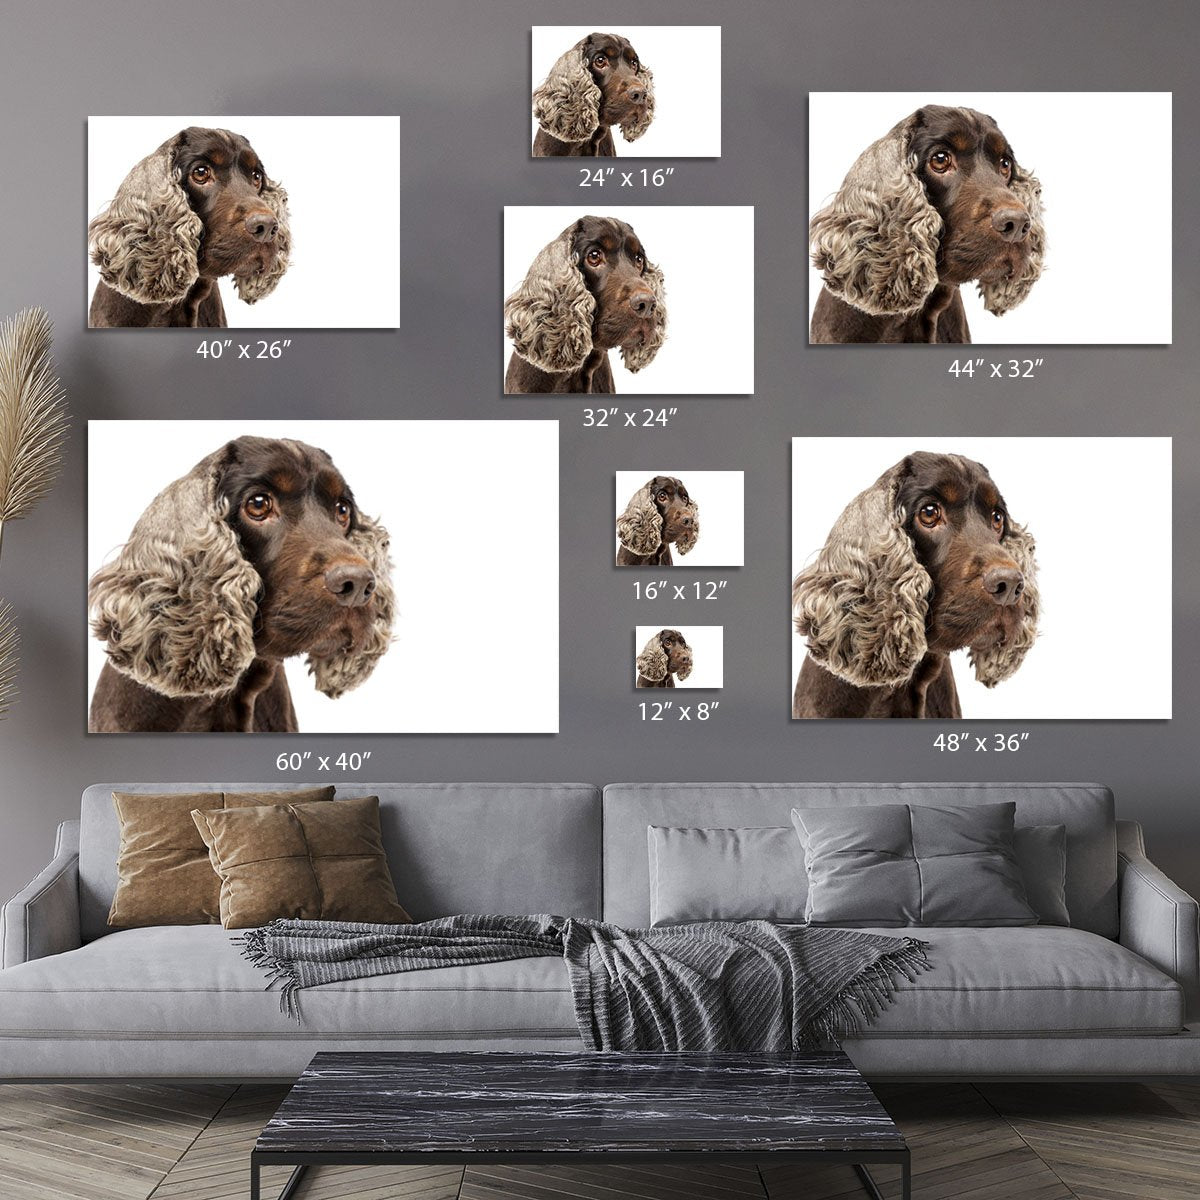 Portrait of an adorable English Cocker Spaniel Canvas Print or Poster